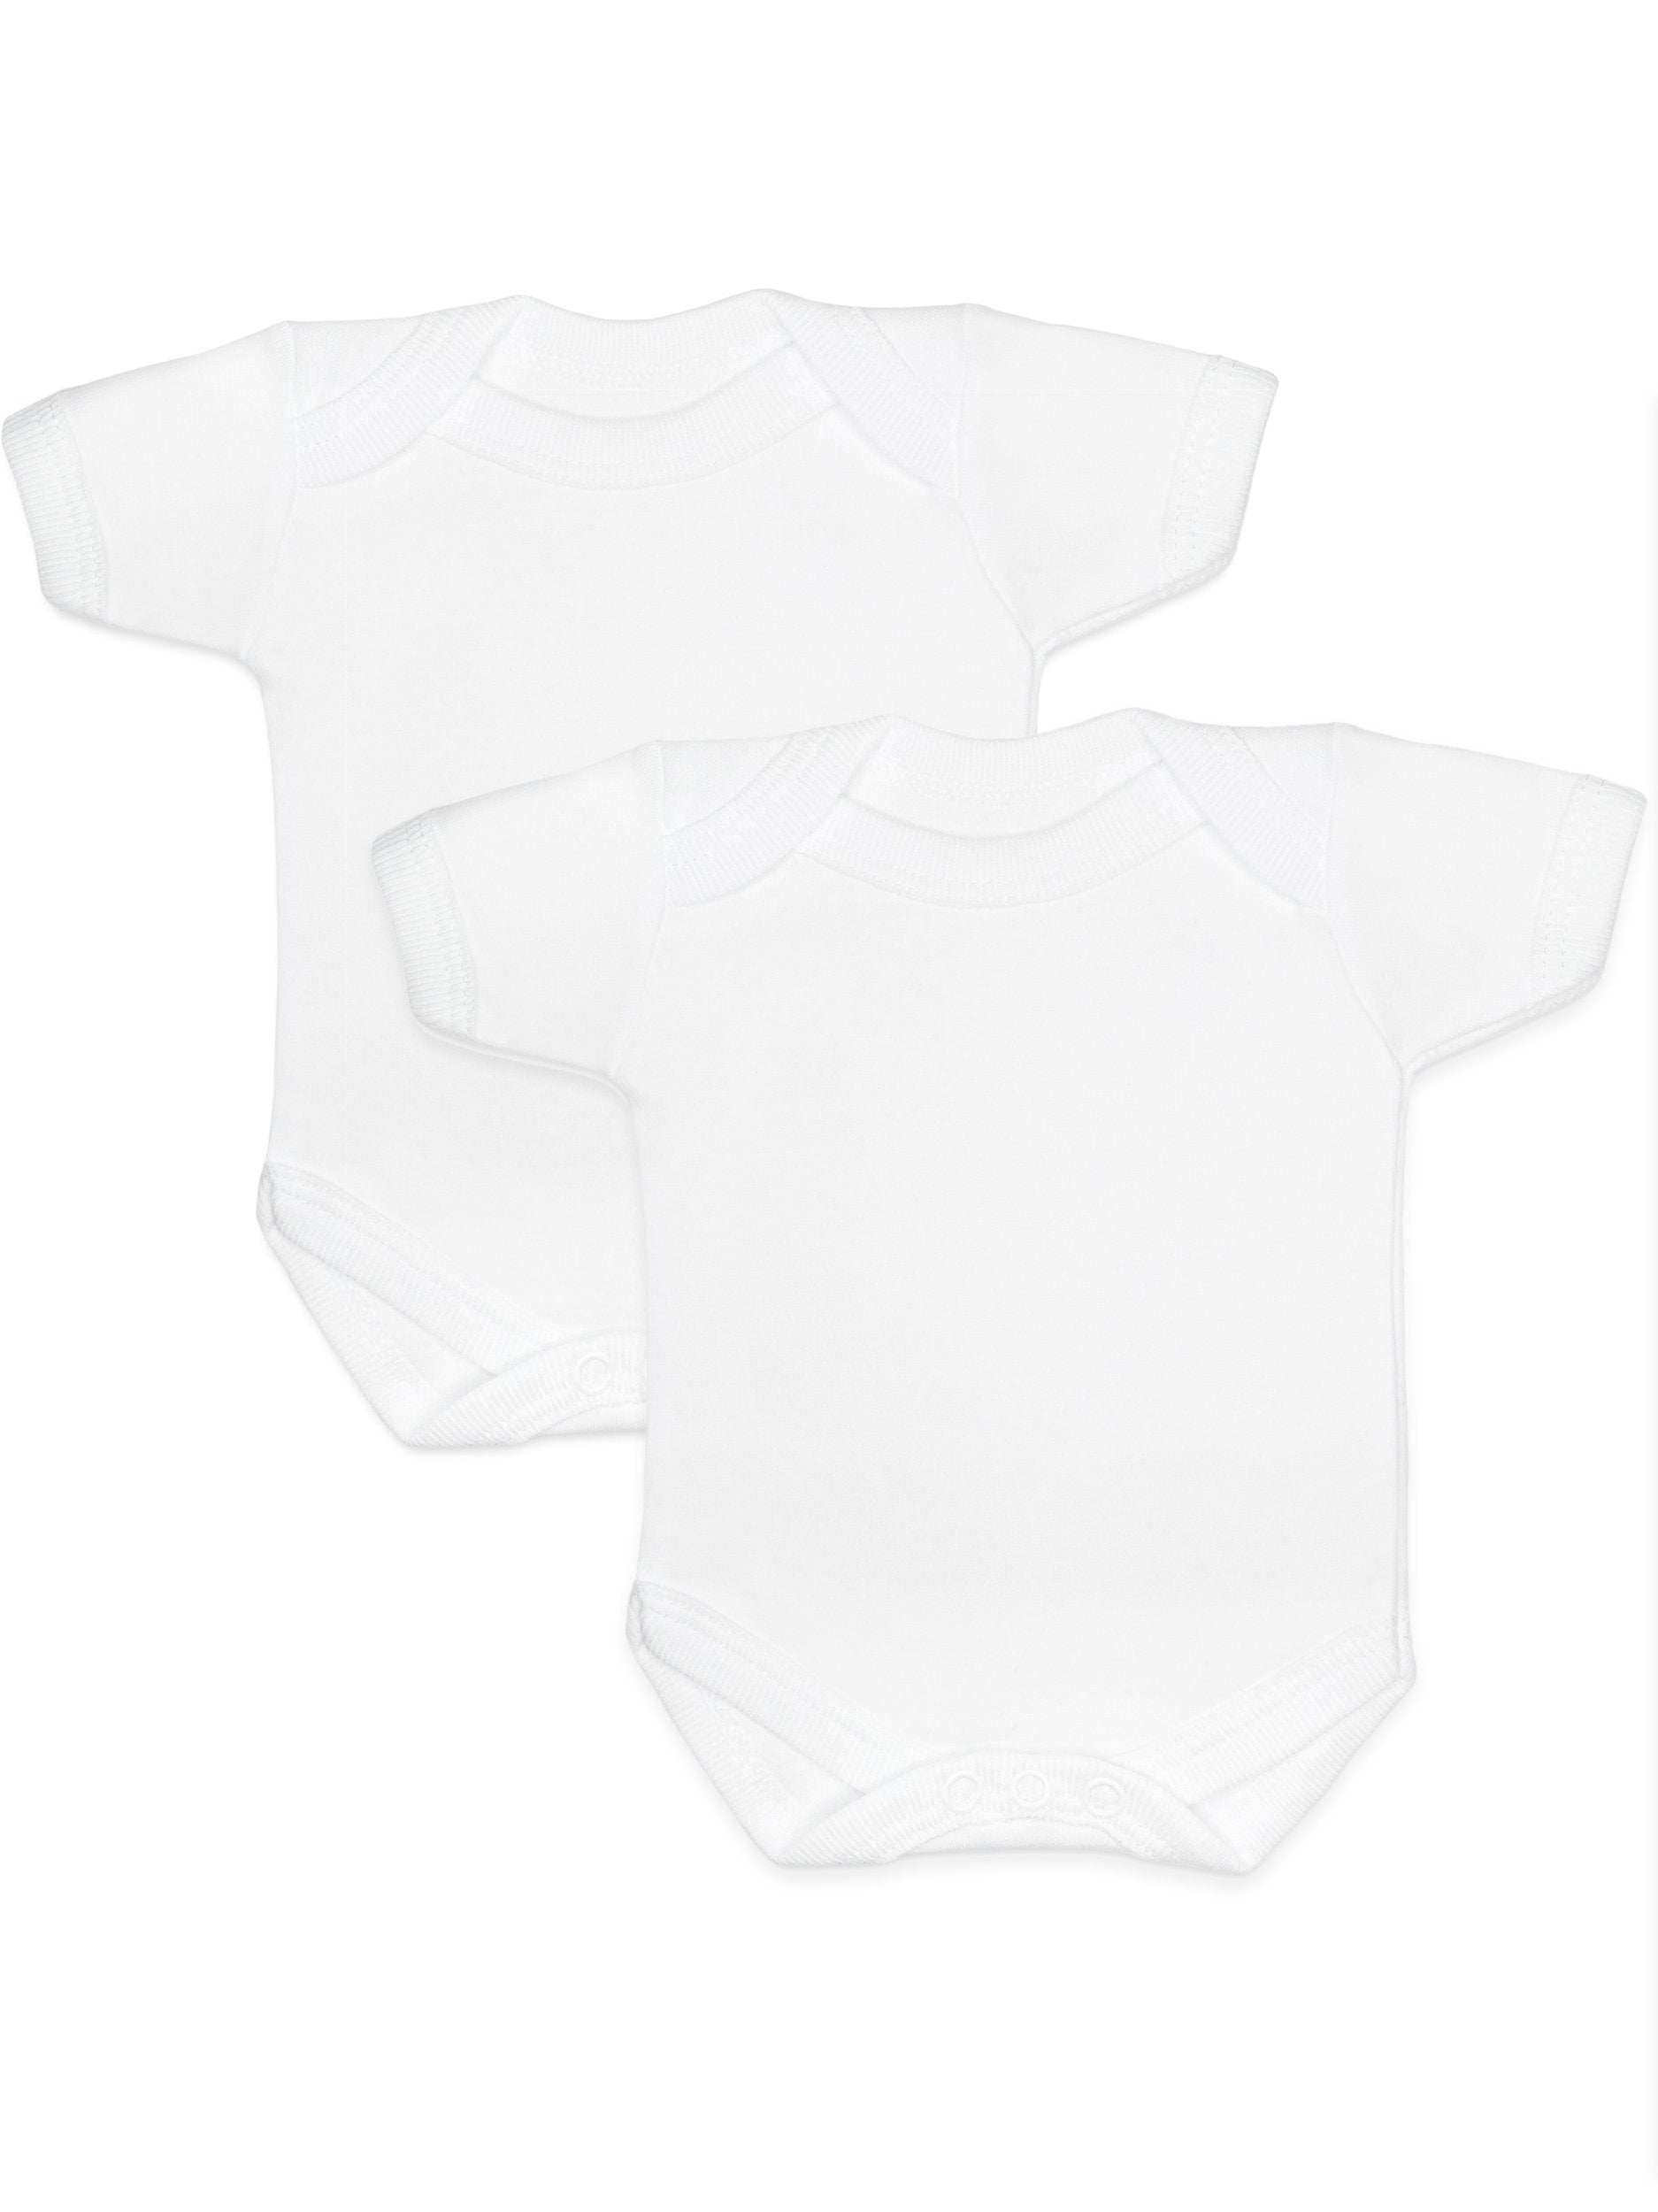 2 Pack - 100% Cotton White Short Sleeved Bodysuits Set/Multipack Little Mouse Baby Clothing & Gifts 